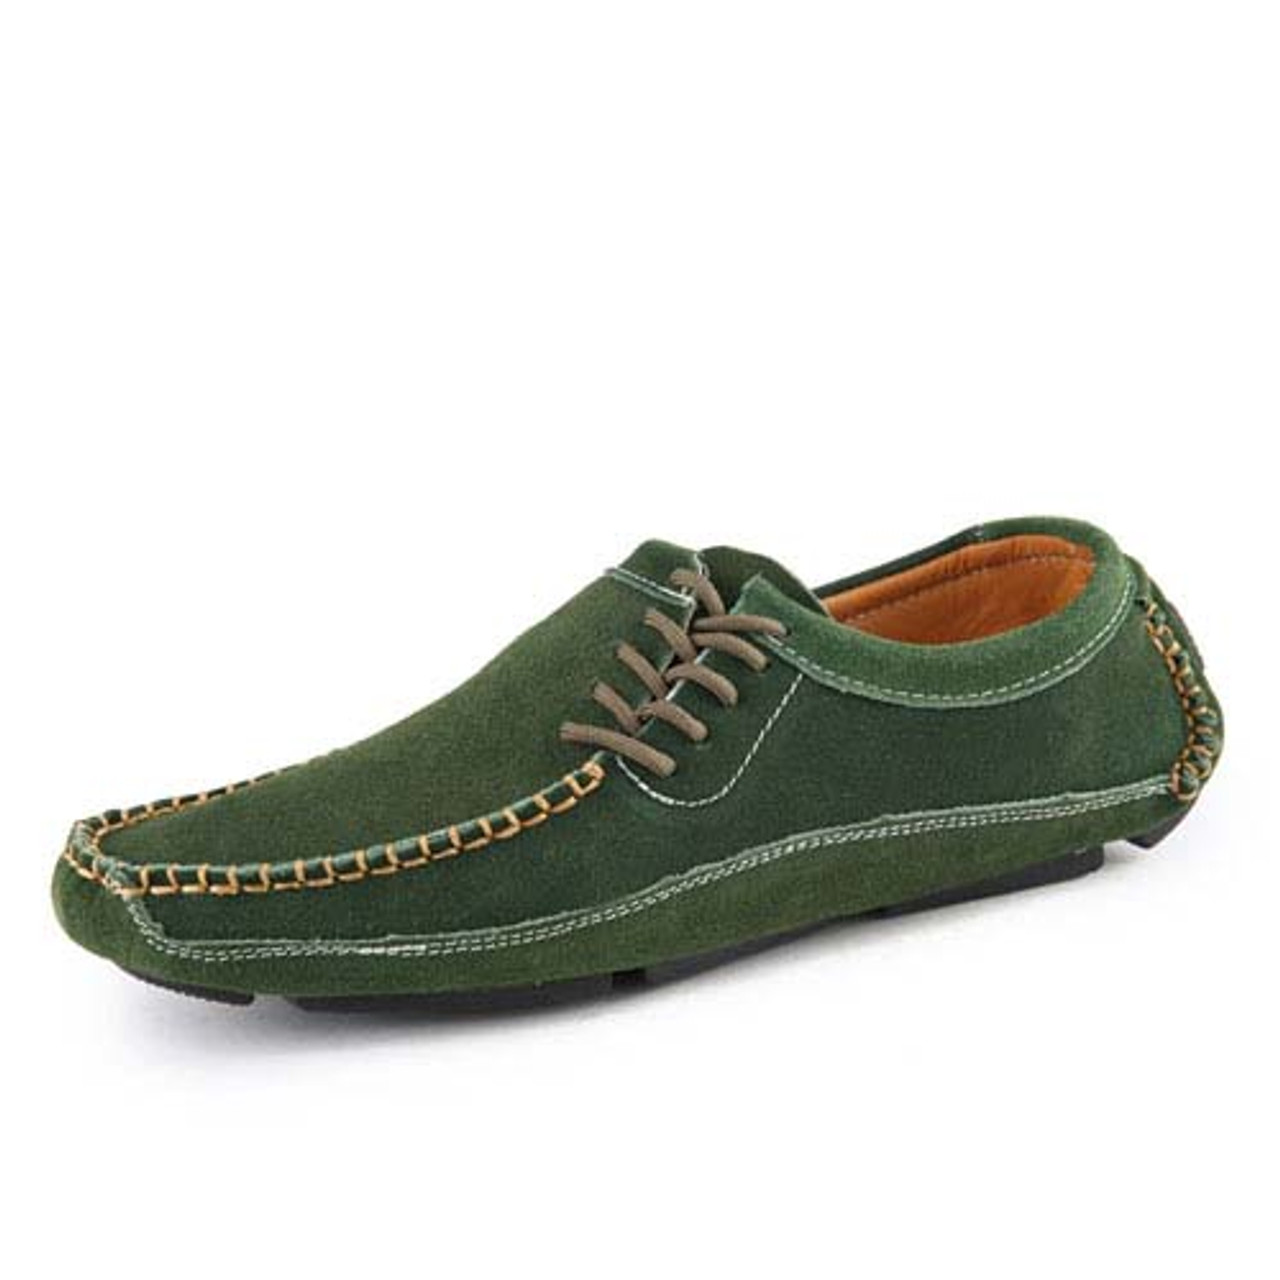 green loafer shoes